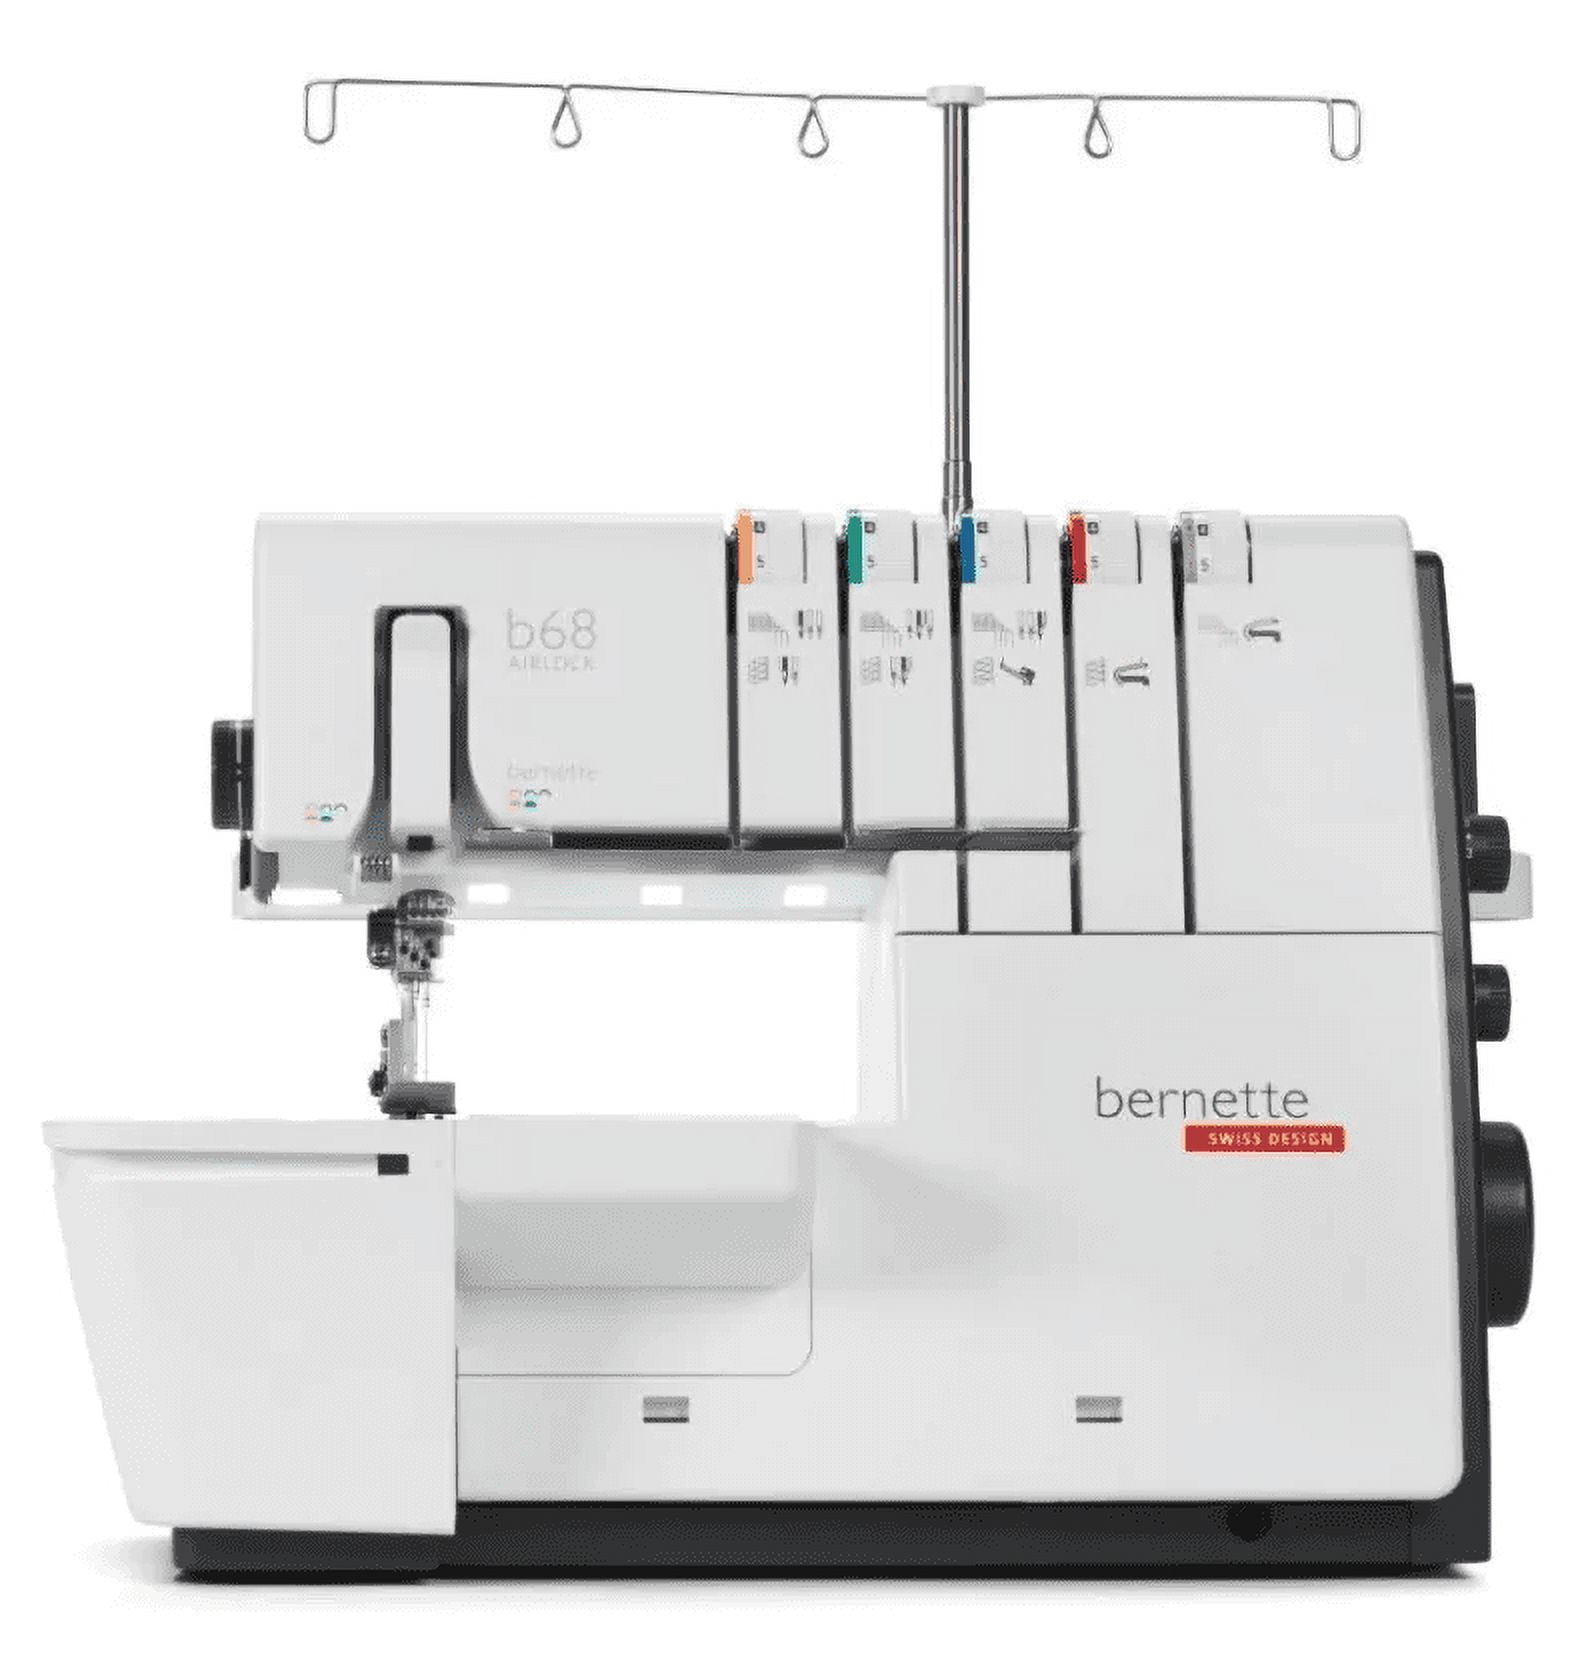 Juki MO-655 Pearl Series Serger with Combo Deal!